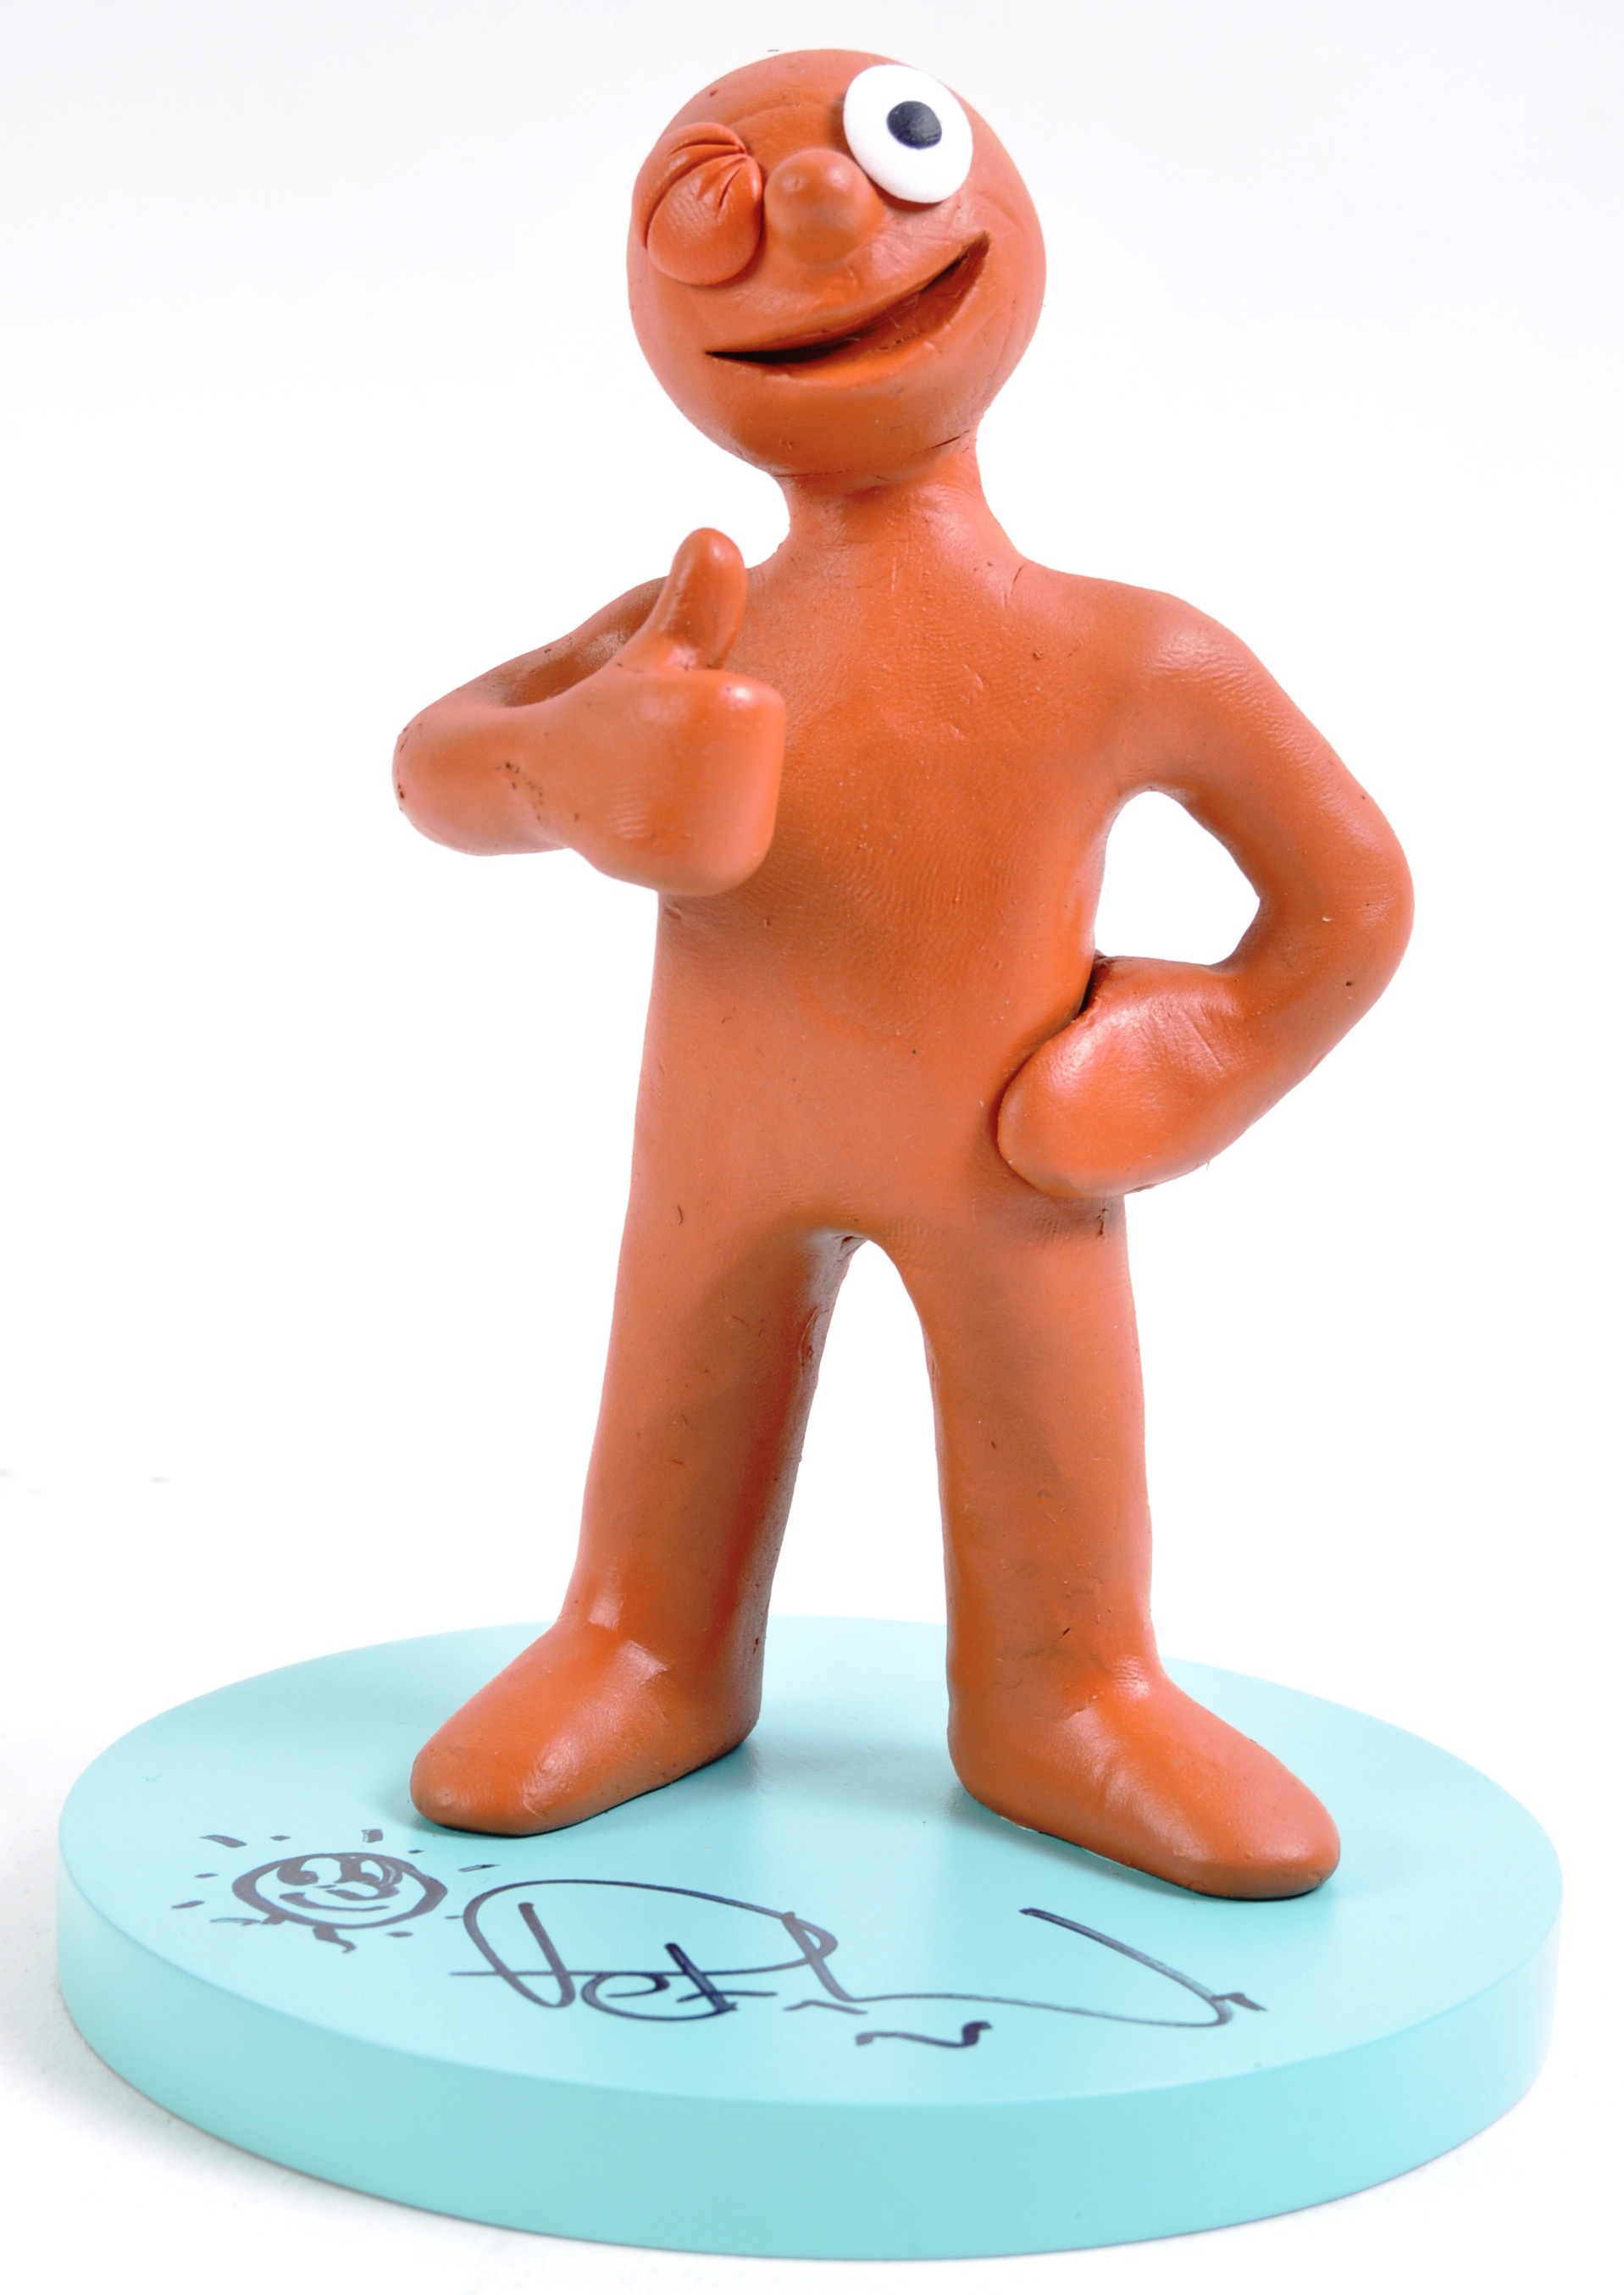 AARDMAN ANIMATIONS - MORPH - SIGNED MORPH STATUE WITH SKETCH